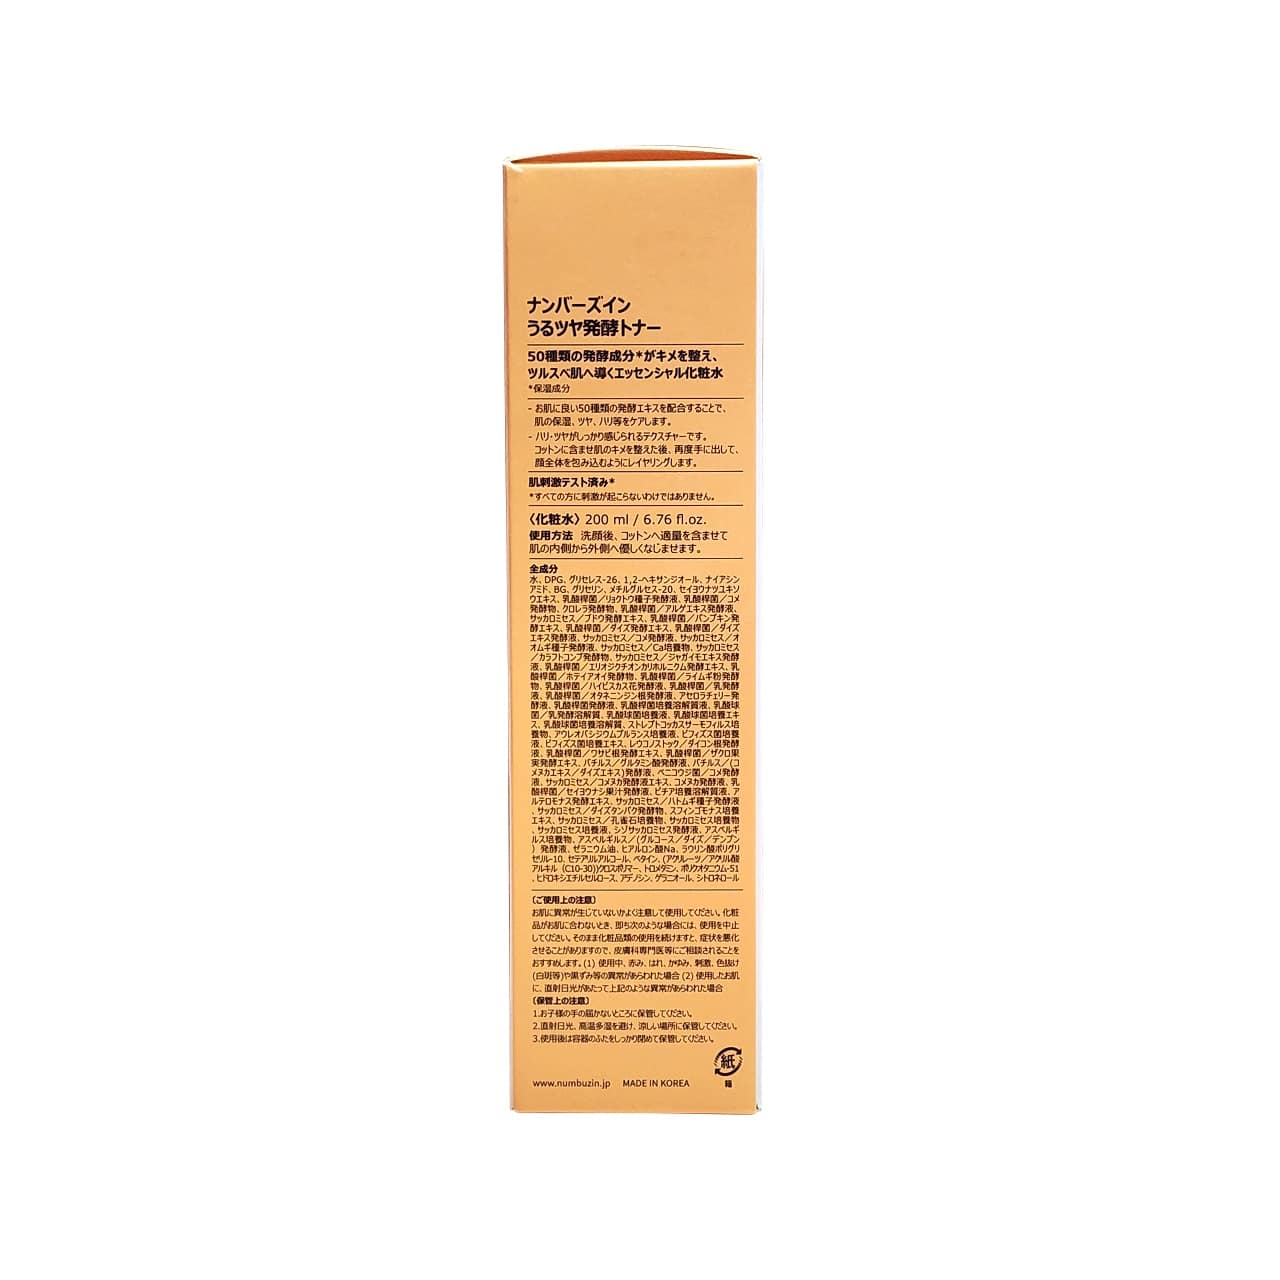 Description, Directions, Ingredients, Warnings for numbuzin No. 3 Super Glowing Essence Toner (200 mL) in Japanese